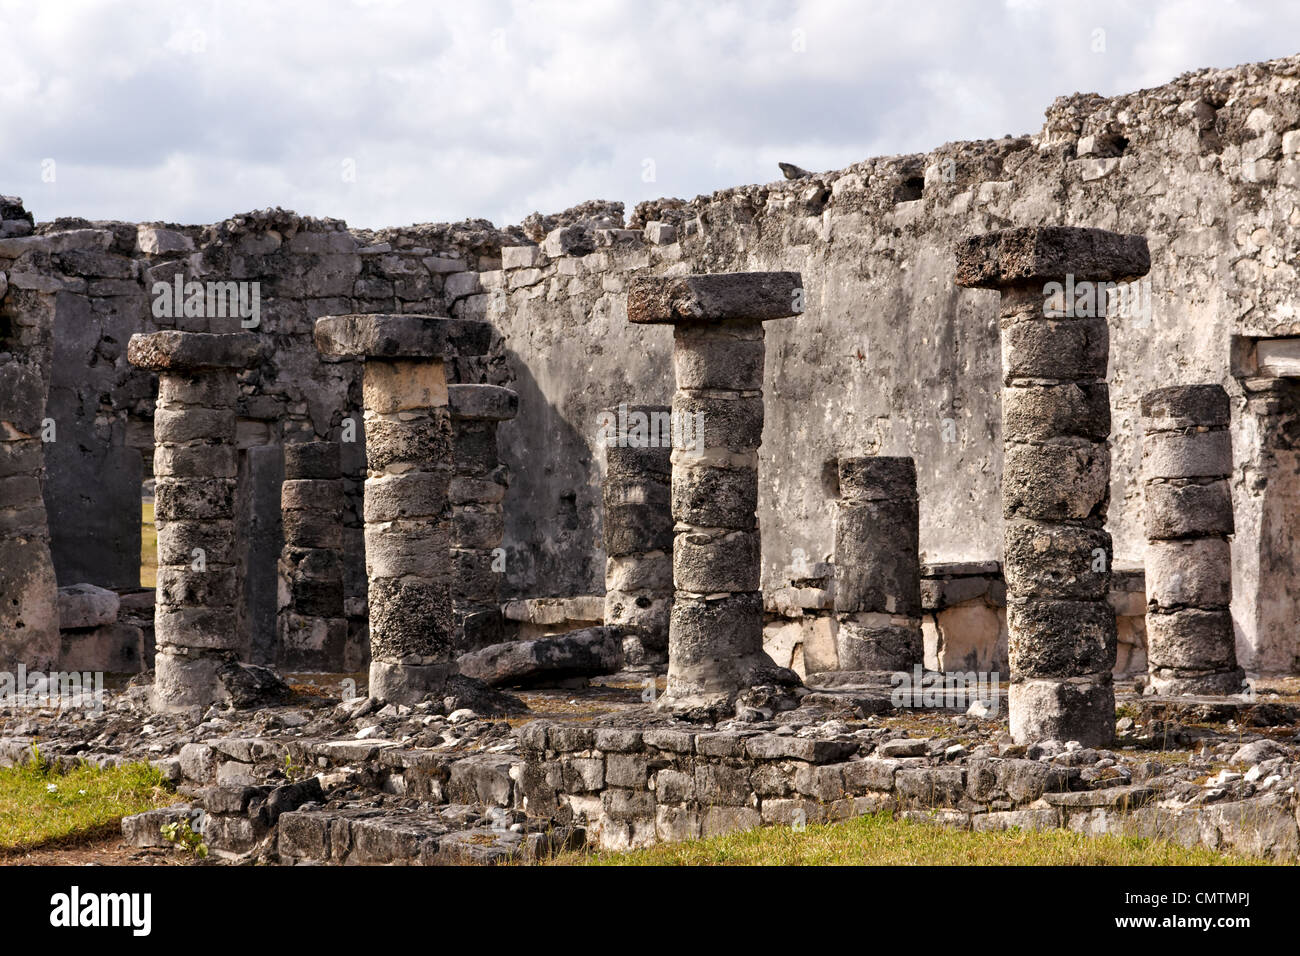 Detail of Mayan ruins with columns at the archaeological site in Tulum, Quintana Roo, Mexico. Stock Photo